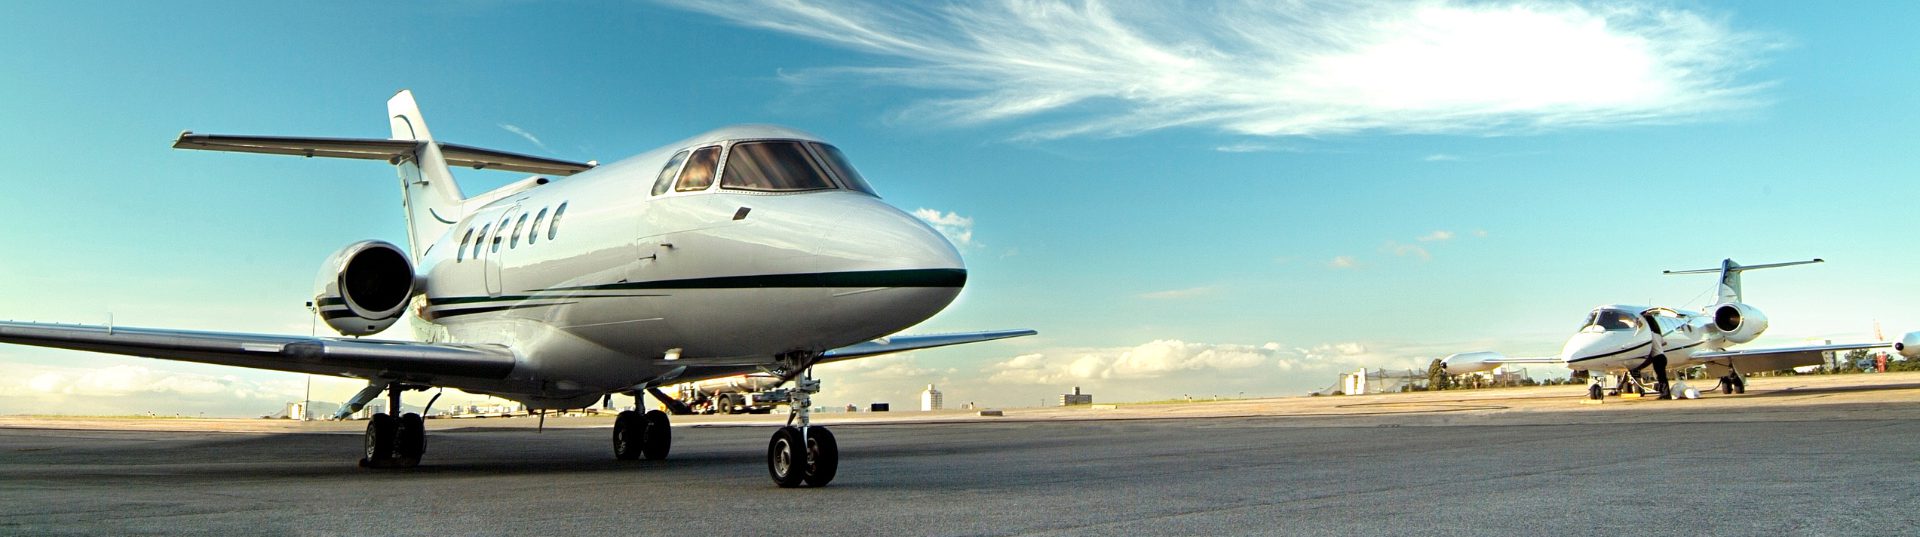 Hyperion Aviation, a leading private aircraft operator